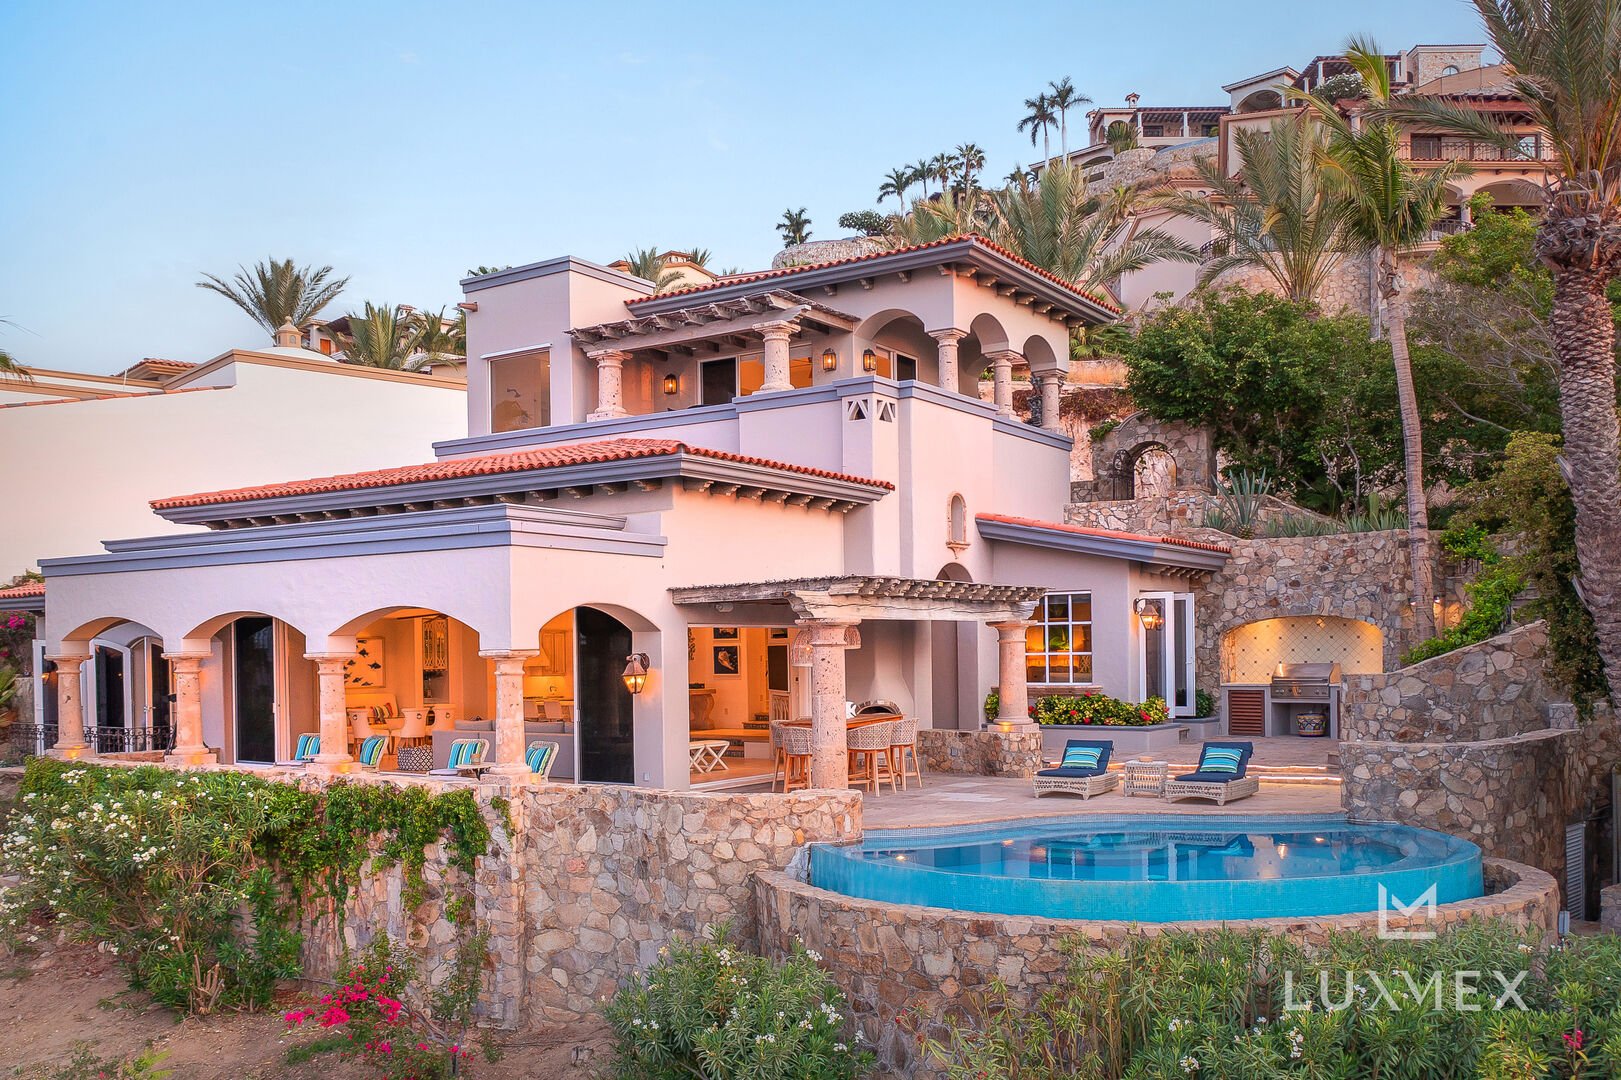 An external view of this Los Cabos Luxury Vacation Villa, showing the elevated pool.